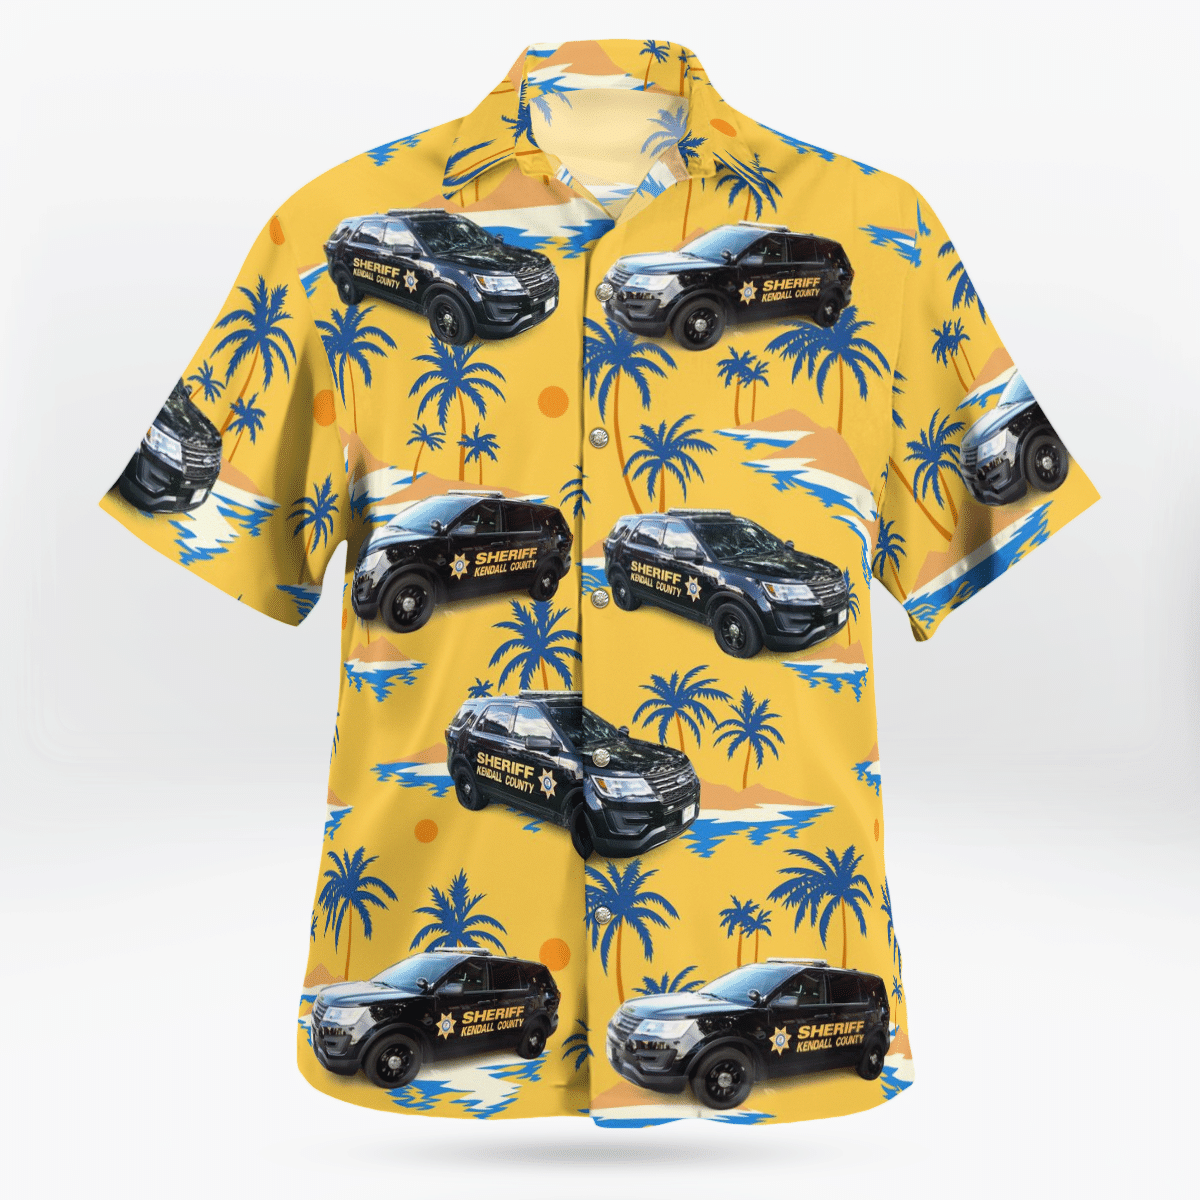 HOT Kendall County Sheriff, Yorkville, Illinois Tropical Shirt2